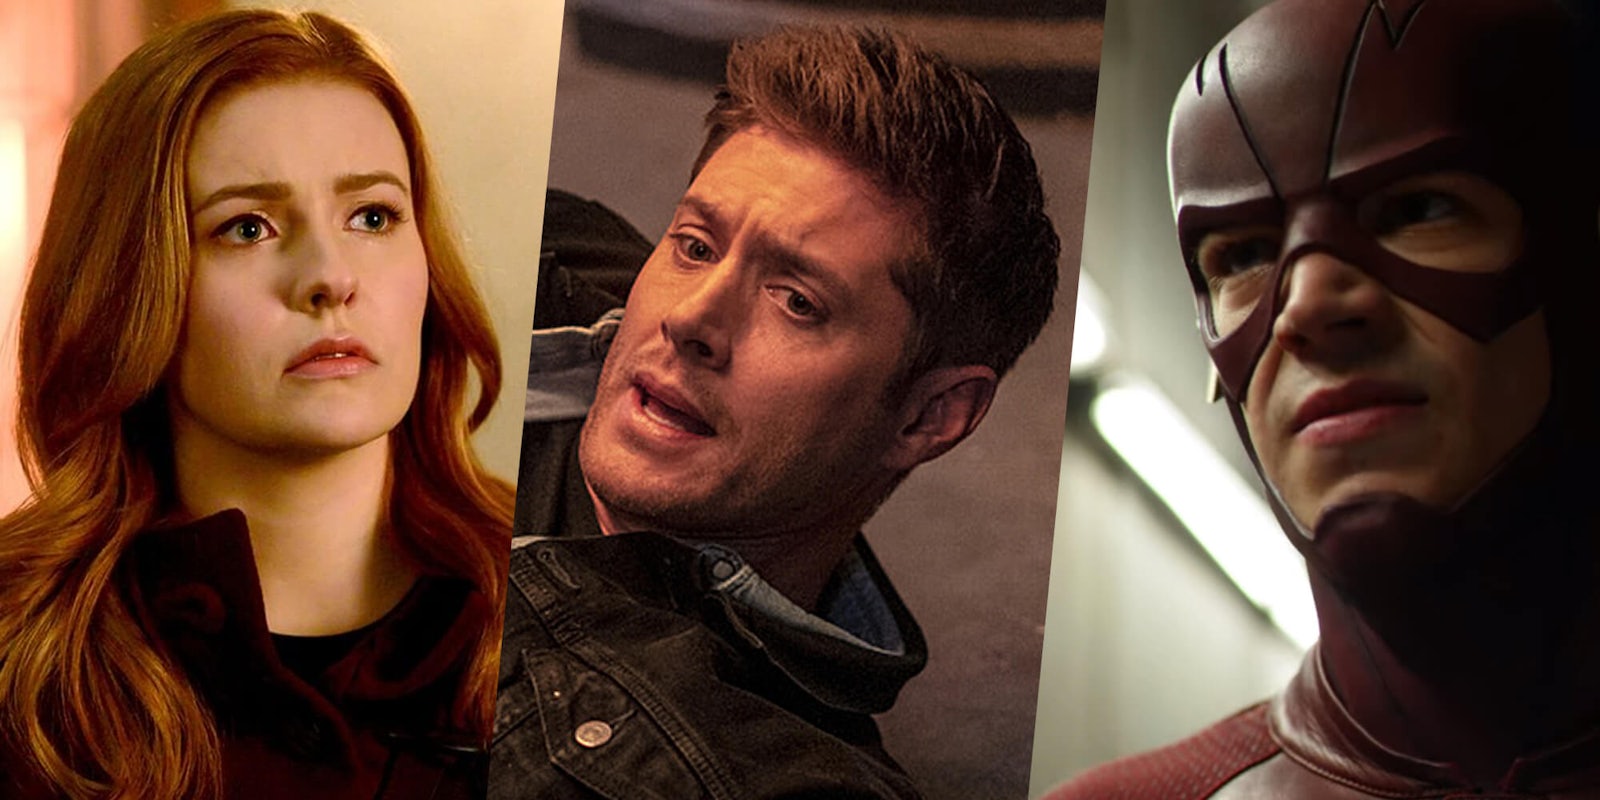 nancy drew, supernatural, and the flash